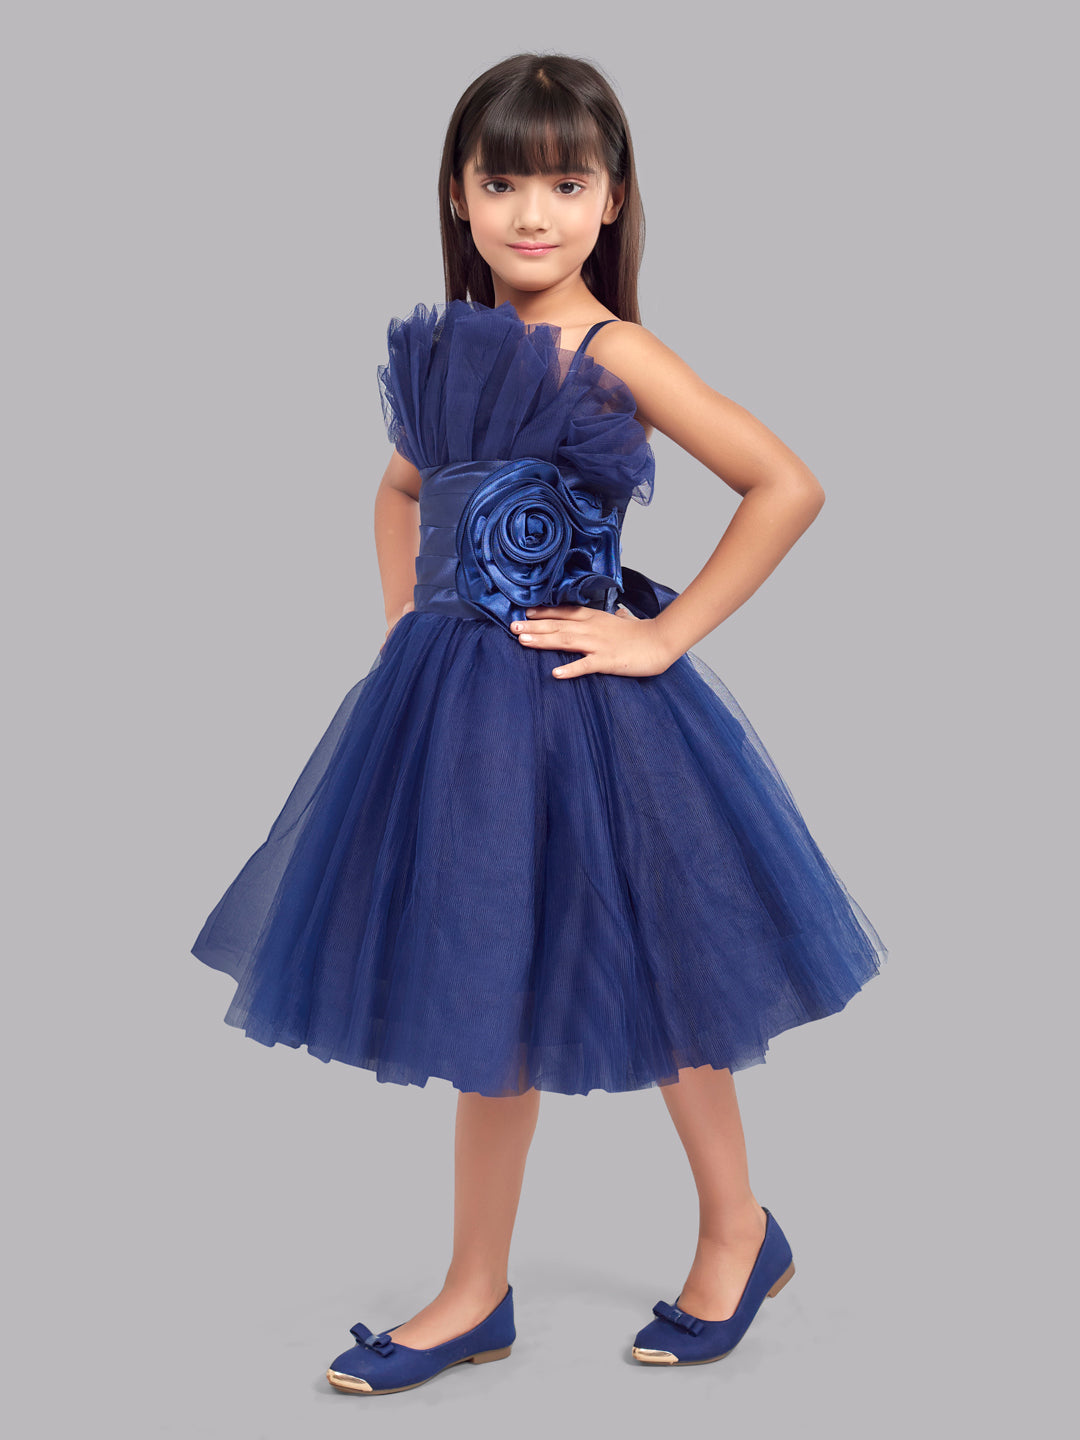 Ruffled Silhouette Party Dress -Navy Blue